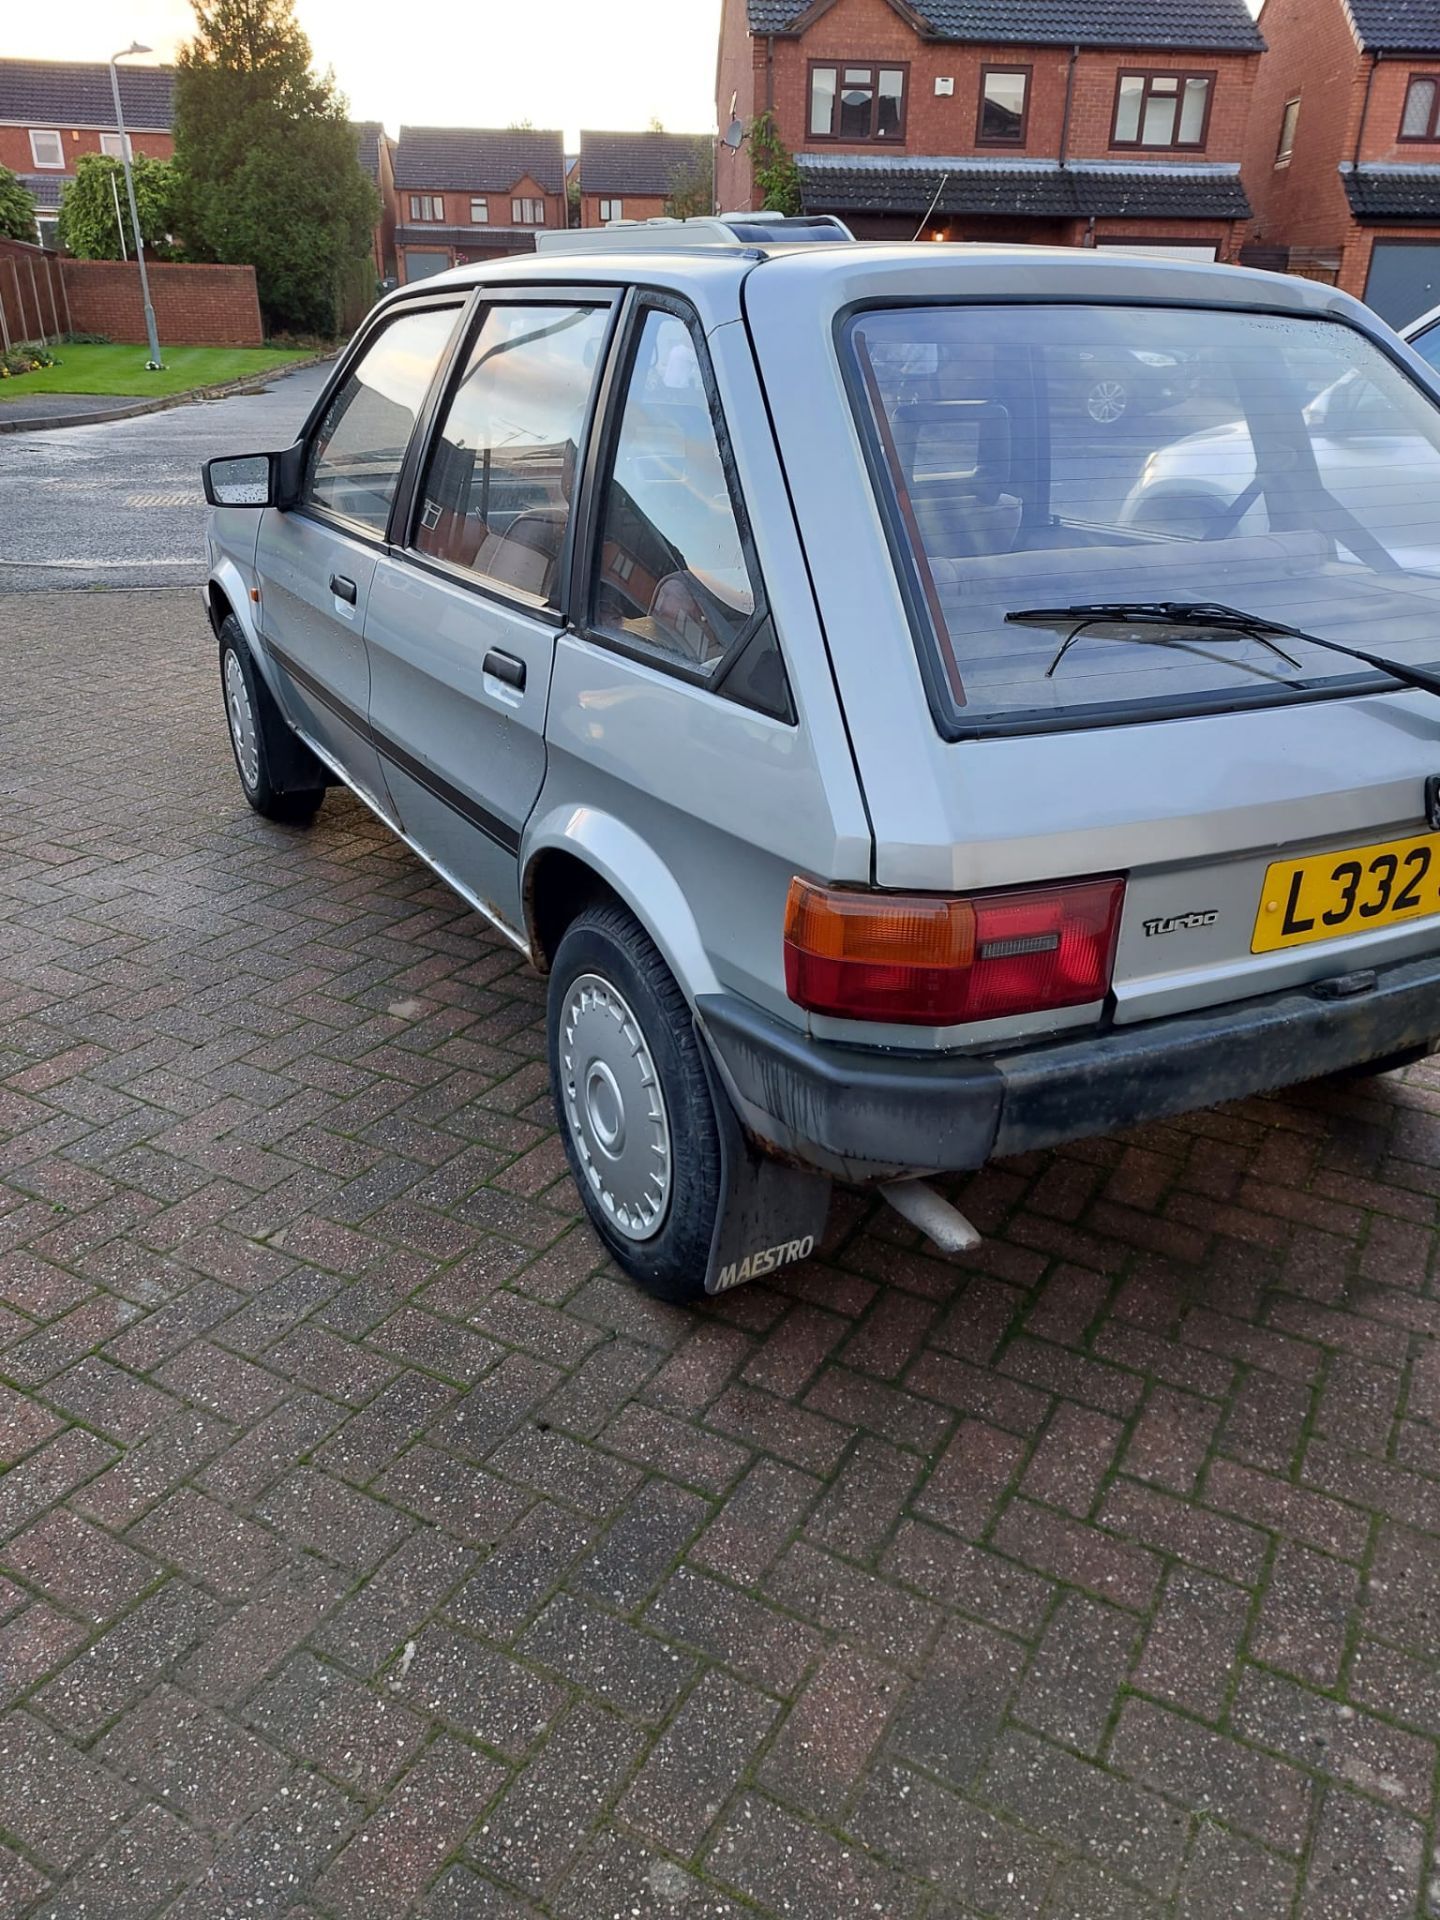 CLASSIC ROVER MAESTRO CLUBMAN D1993 WITH A 2.0L DIESEL TURBO ENGINE - 58K MILES (NO VAT ON HAMMER) - Image 8 of 12